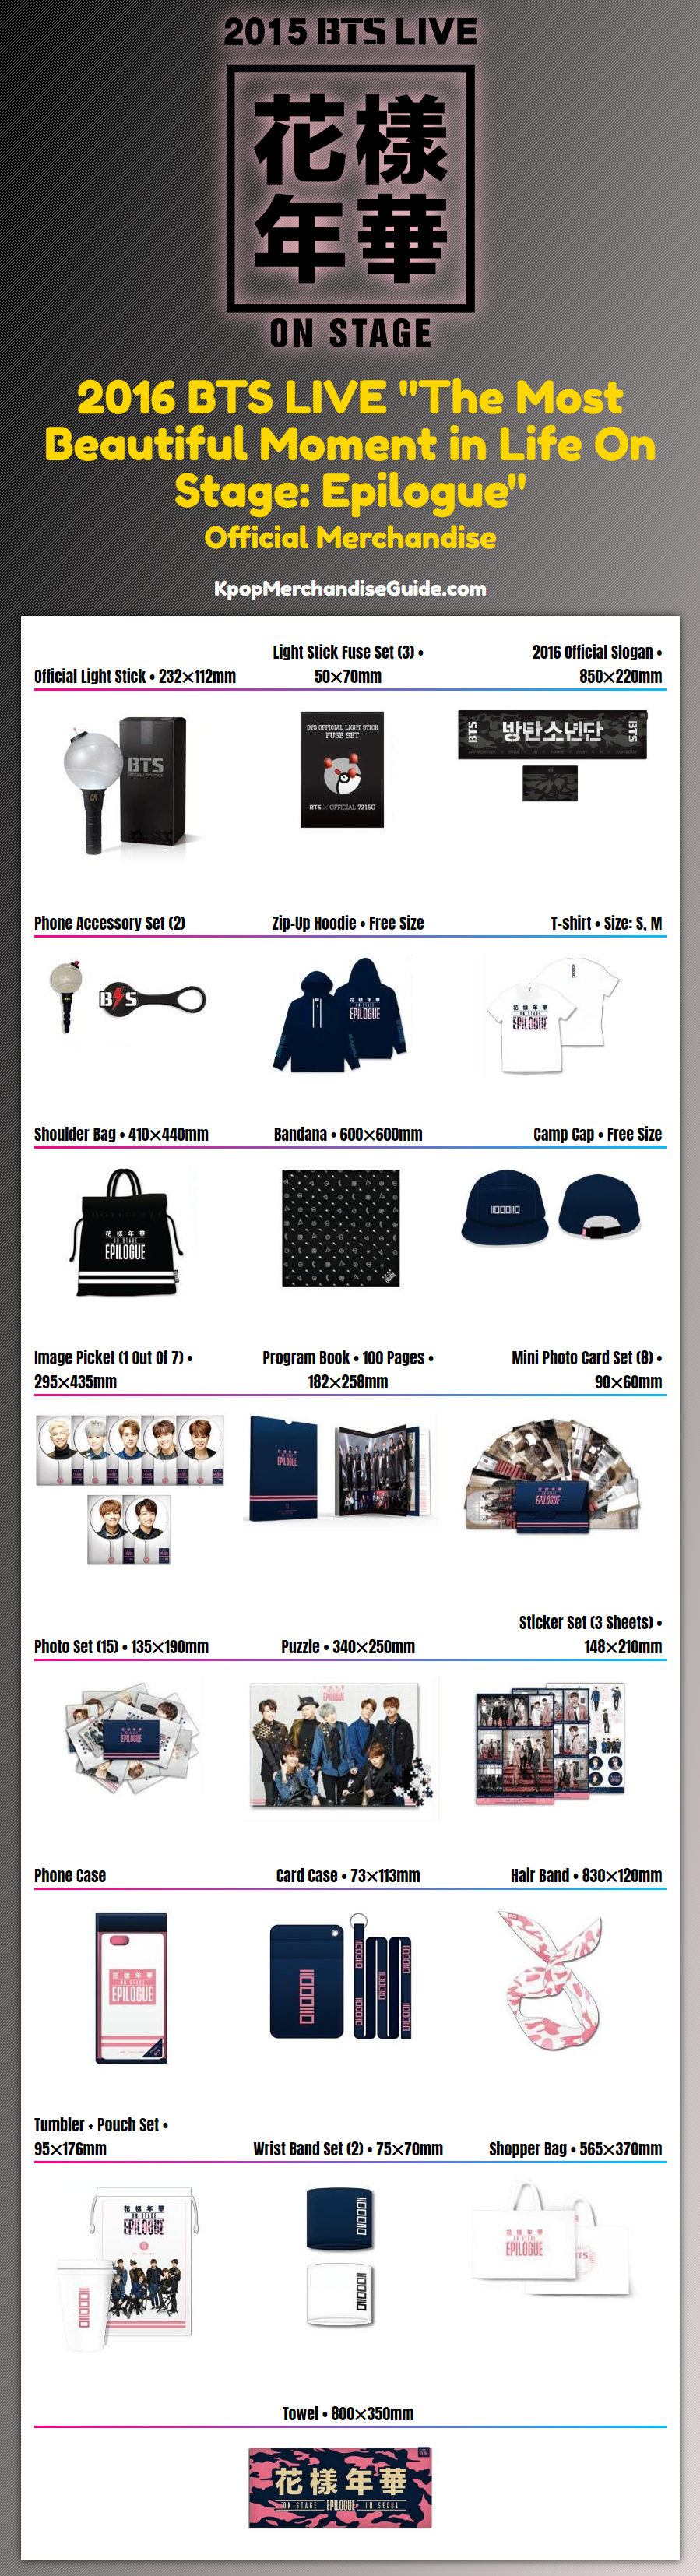 2016 BTS LIVE The Most Beautiful Moment in Life On Stage: Epilogue Merchandise